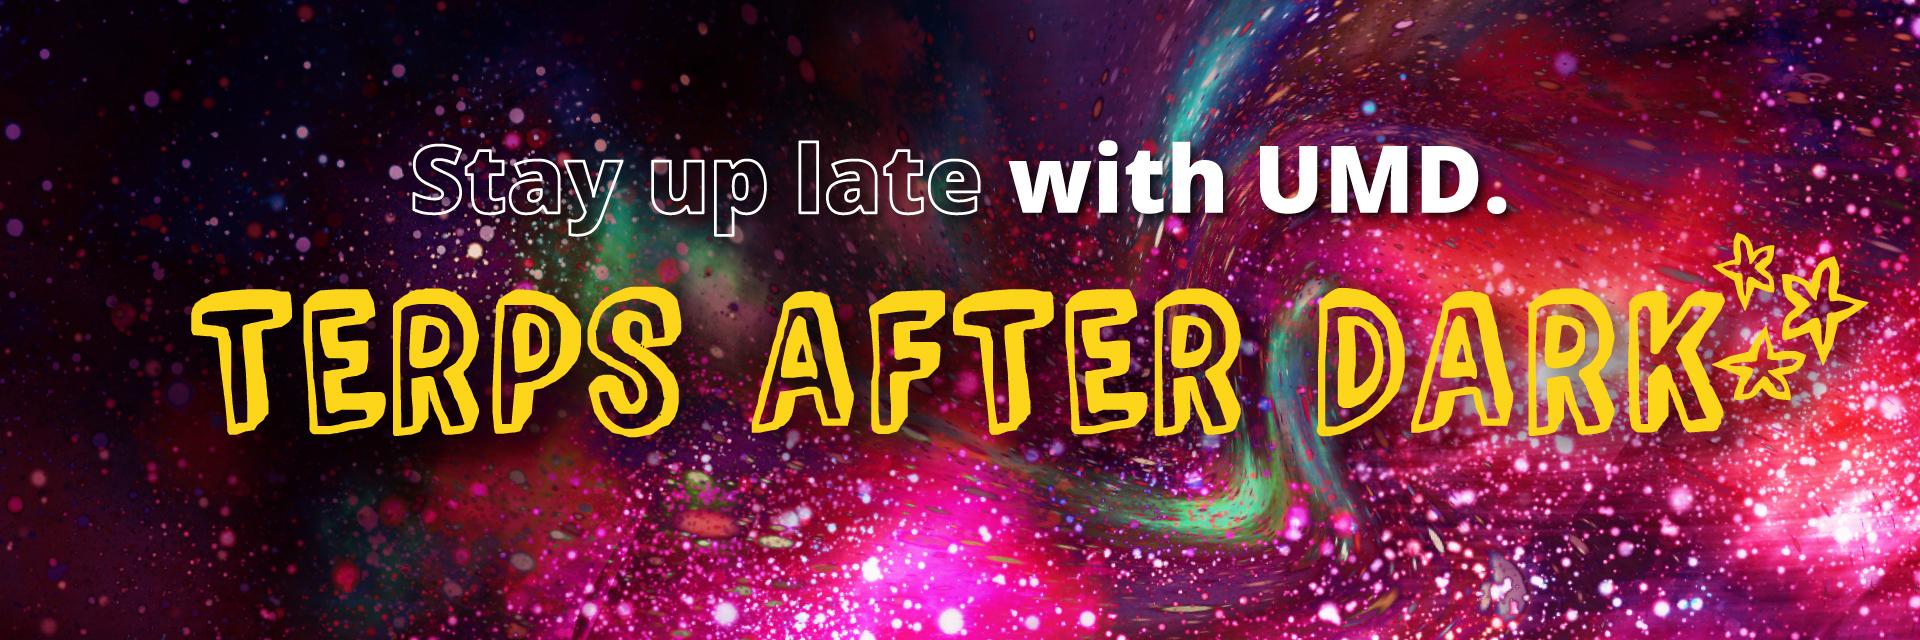 Stay up late with UMD at Terps After Dark